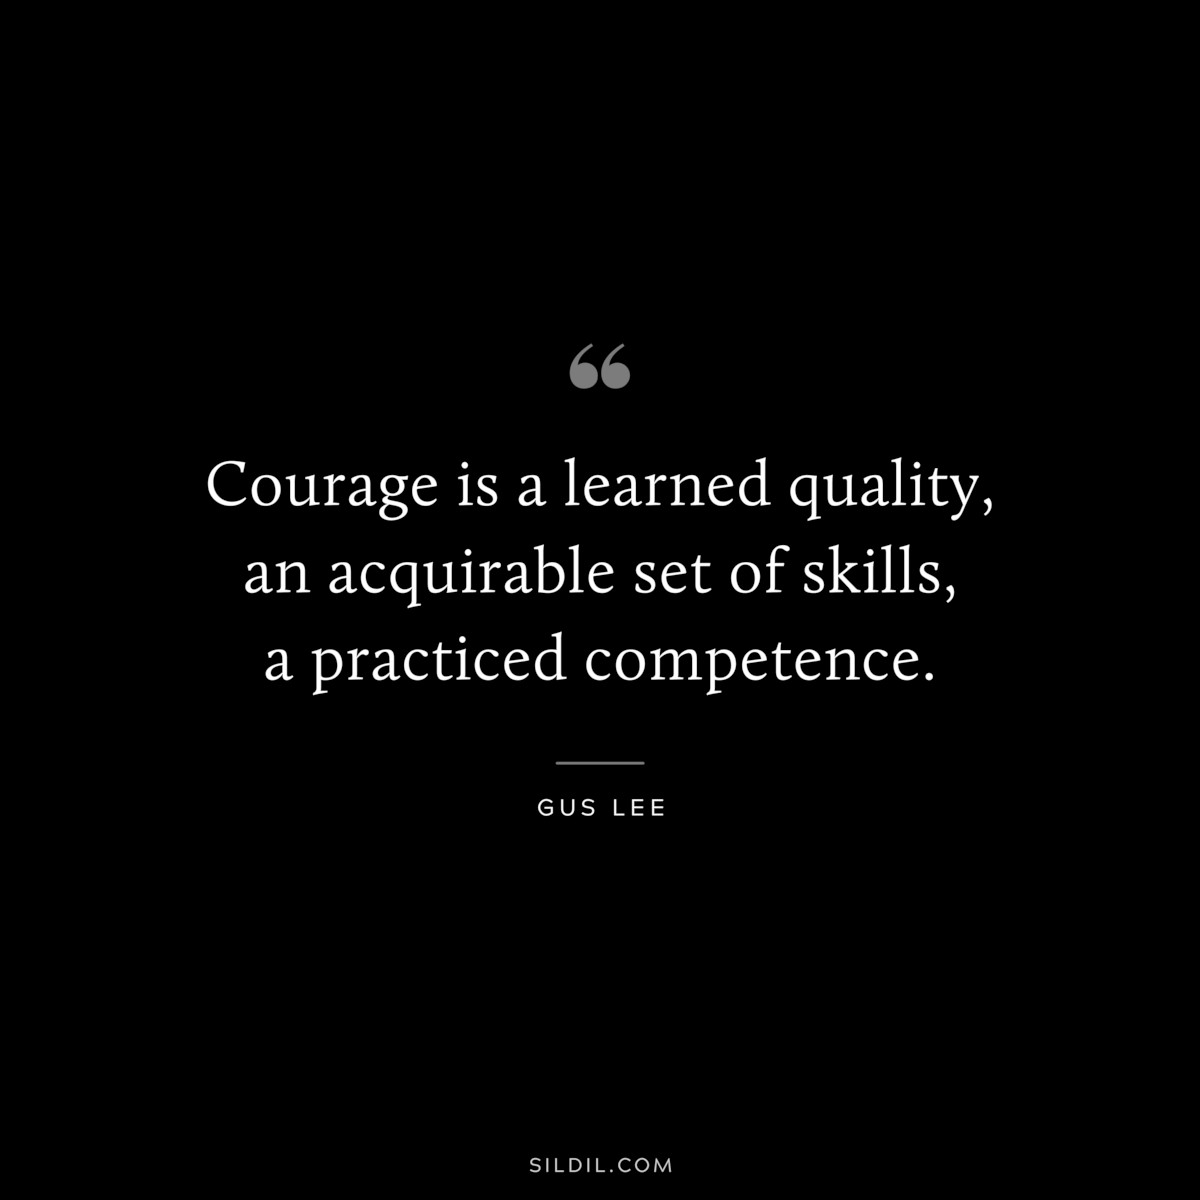 Courage is a learned quality, an acquirable set of skills, a practiced competence. ― Gus Lee